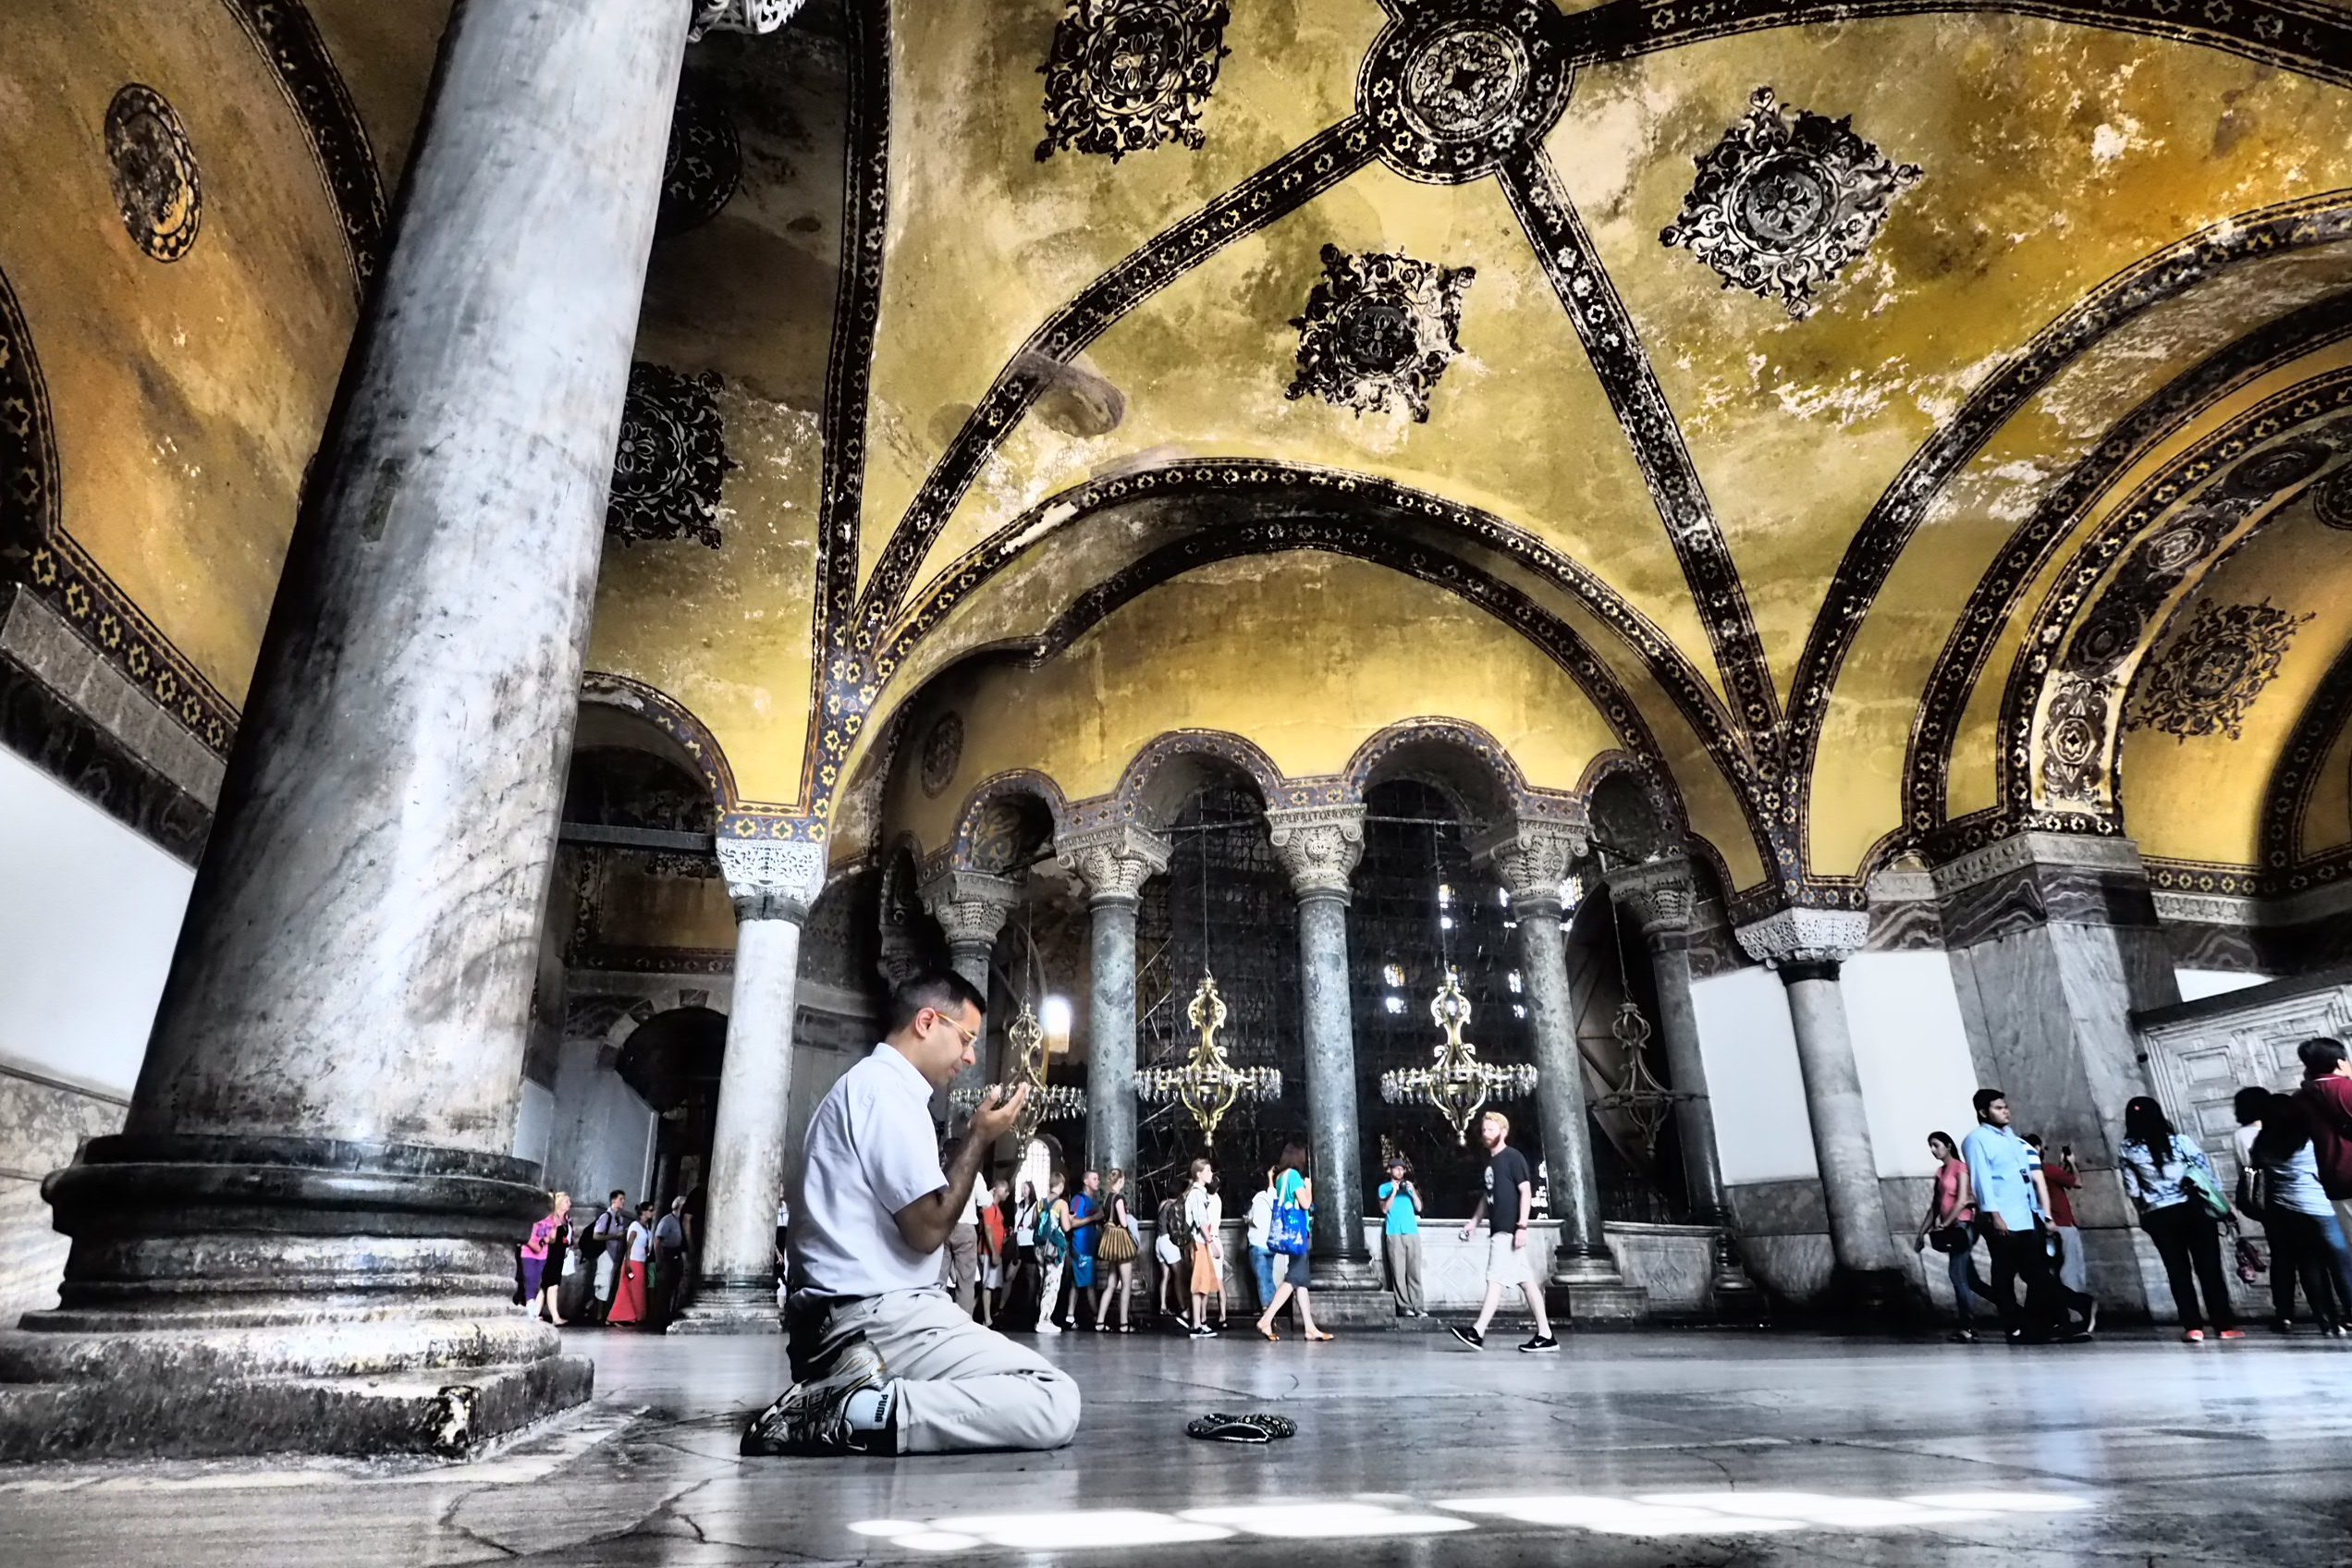 My Journey to the Ever-Evolving Hagia Sofia - About Islam